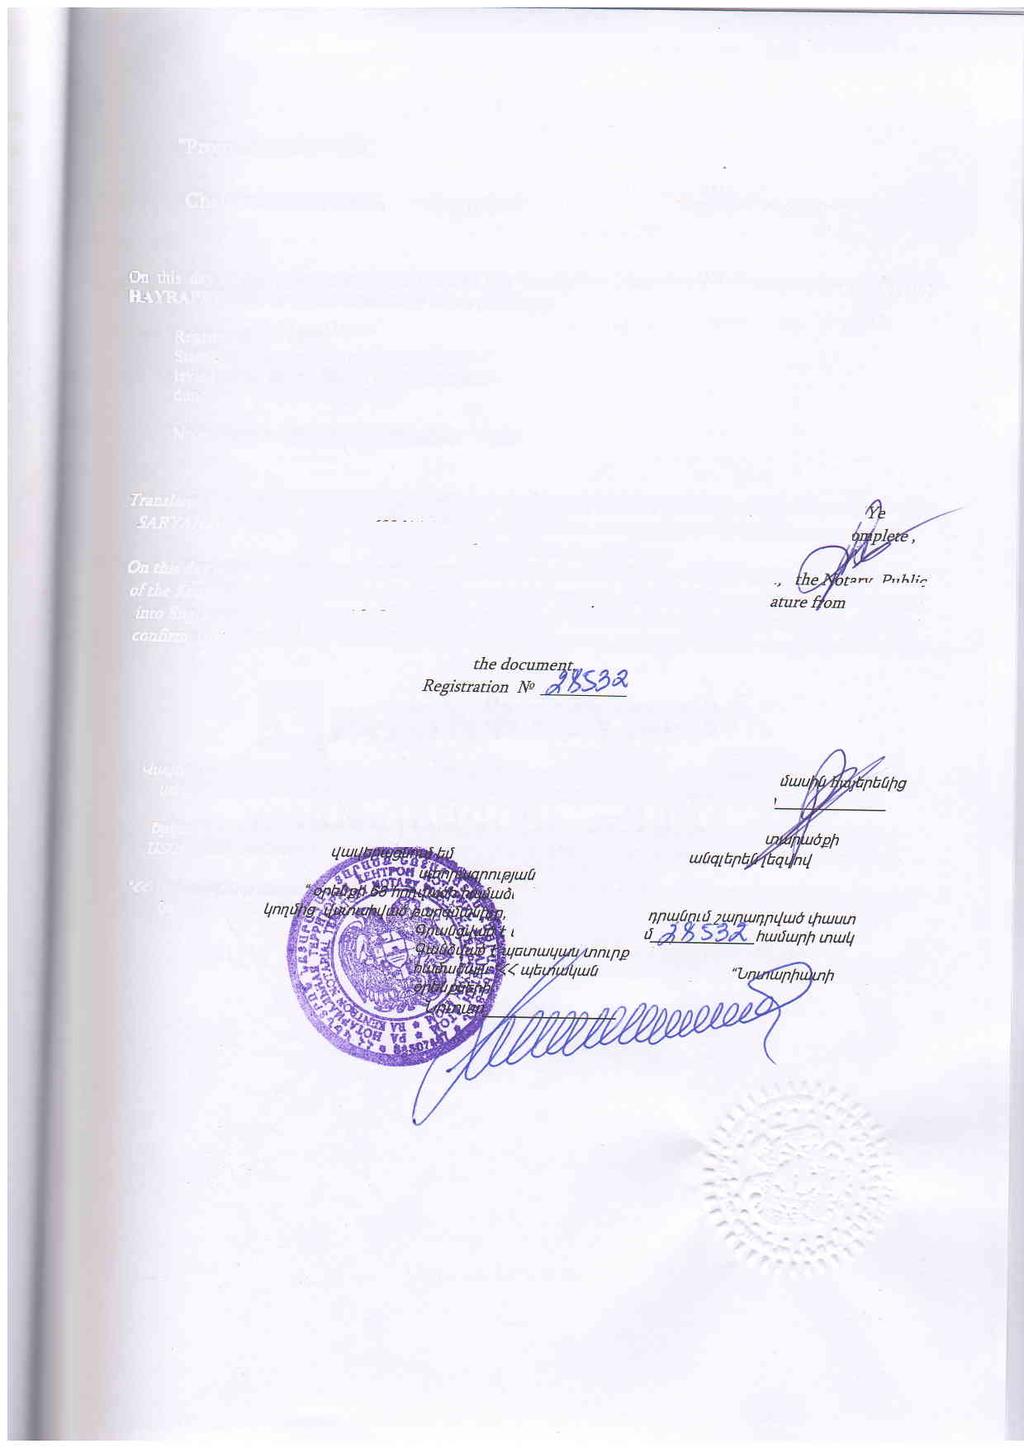 'Prometey Bank" CJSC Chairman of the Board /signature/ Emil Soghomonyan tln this day of November fourth, two thousand and sixteen, R{}'RAPETYAN, certi0z the authenticity of this photocopy.